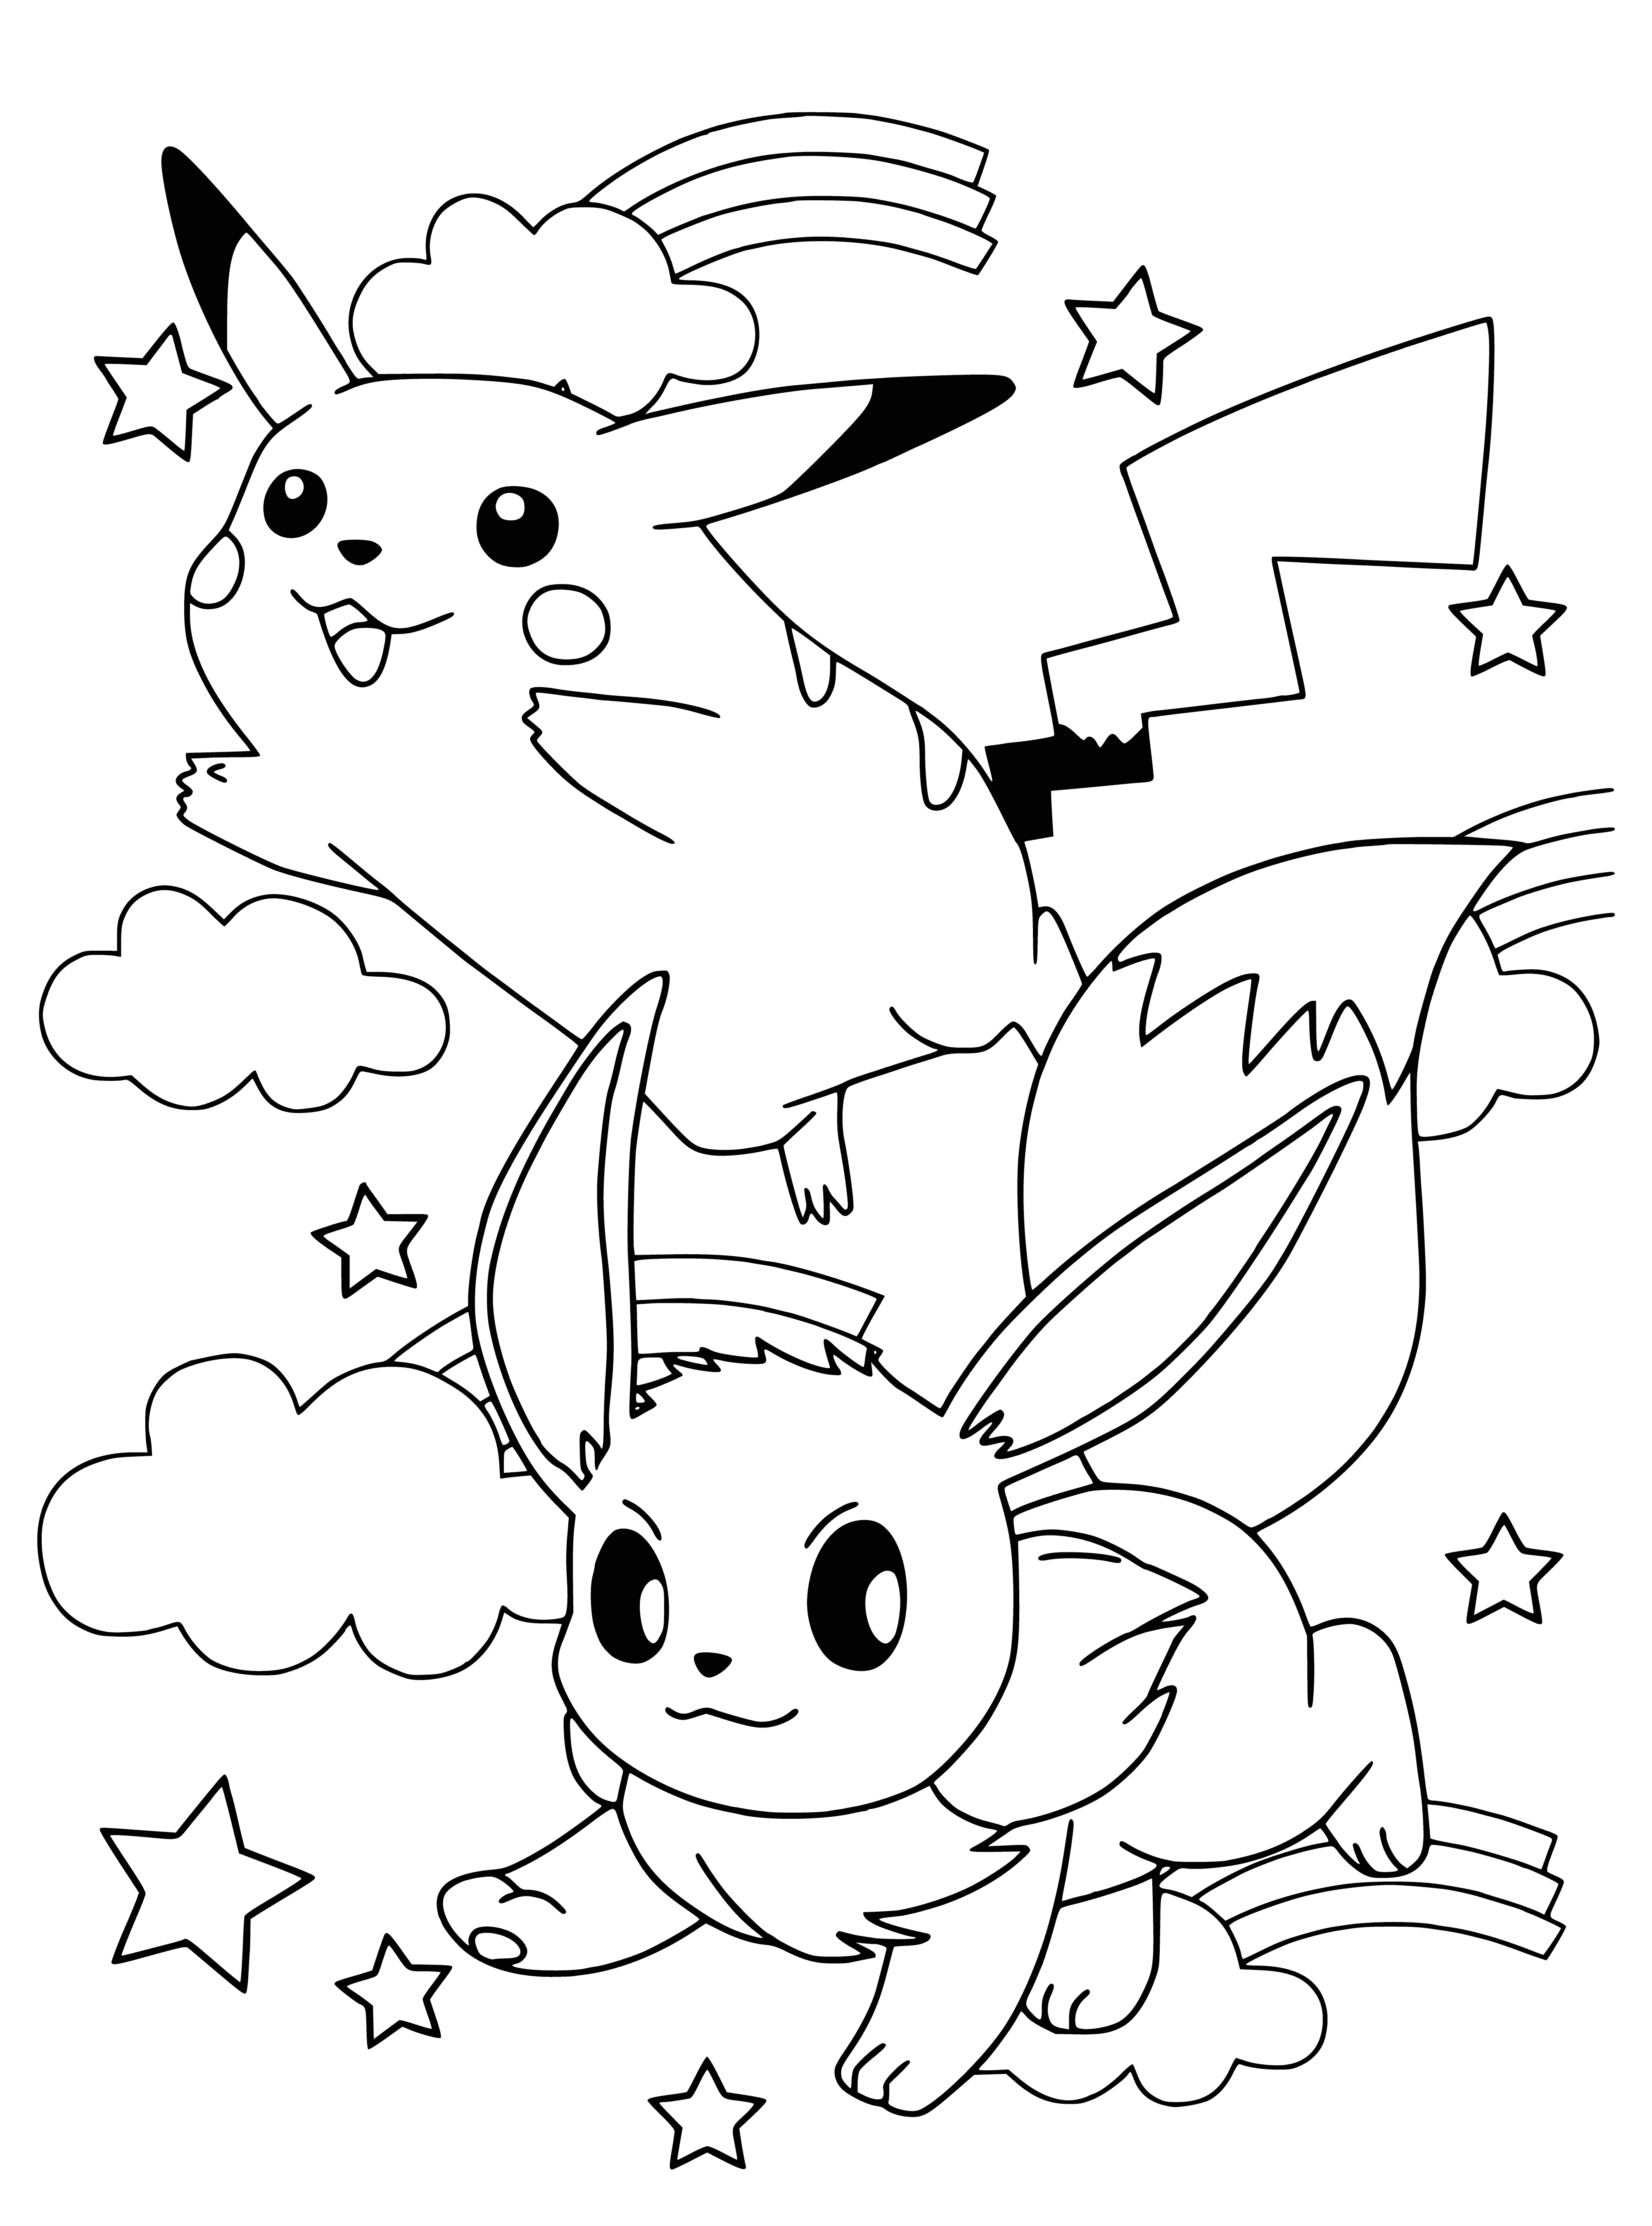 coloring page: Pikachu is an adorable, electric-generating, yellow furred creature w/ a reddish-brown back and black ear tips. Uses electric charges for self-defense.